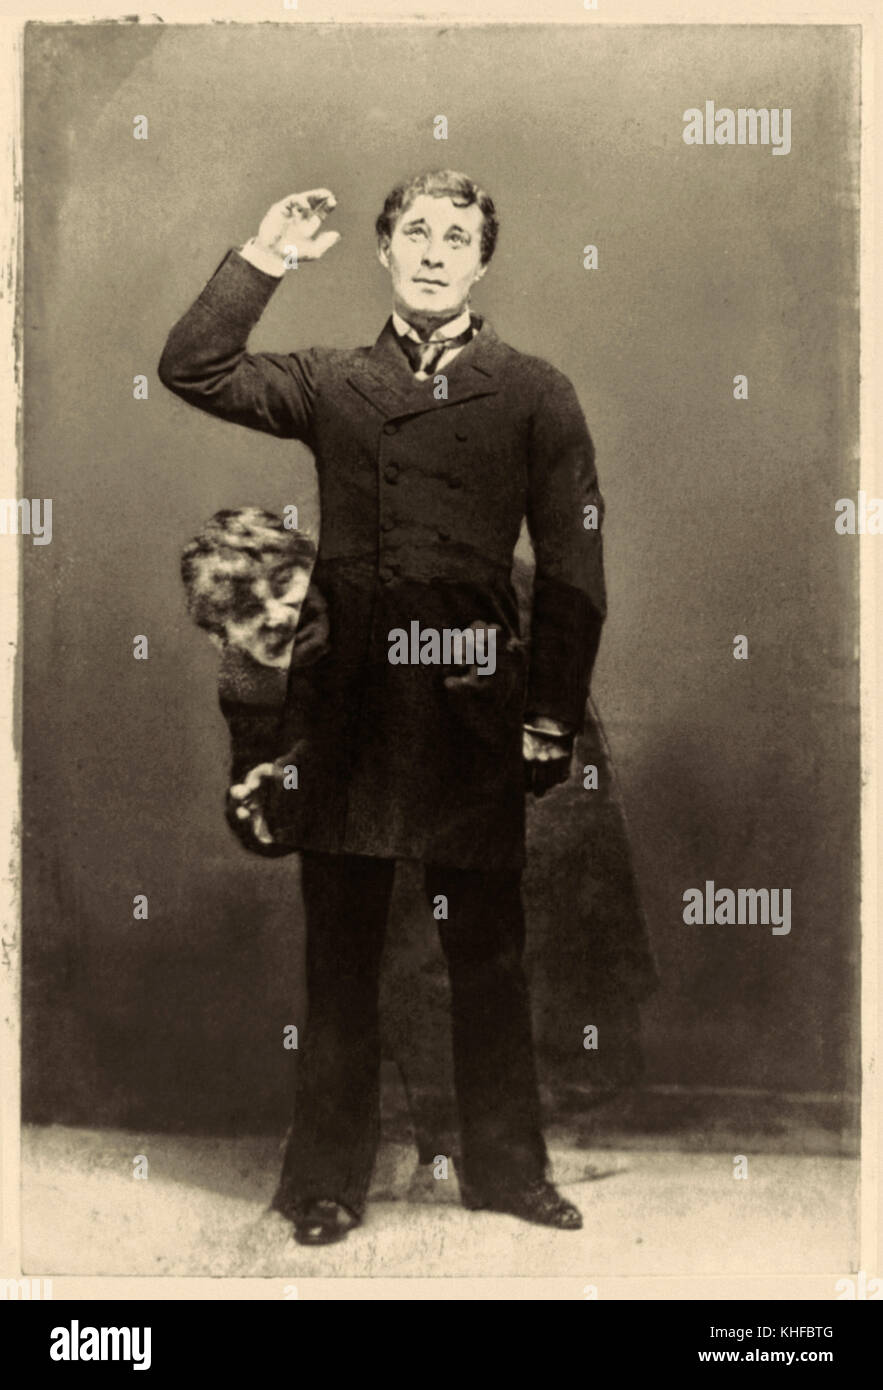 Richard Mansfield (1857-1907) English actor in superimposed photograph showing the dual characters he played in ‘Dr. Jekyll and Mr. Hyde’ a 1887 stage adaptation of Robert Louis Stevenson (1850-1894) Gothic novel the ‘Strange Case of Dr Jekyll and Mr Hyde’ published in 1886. Stock Photo